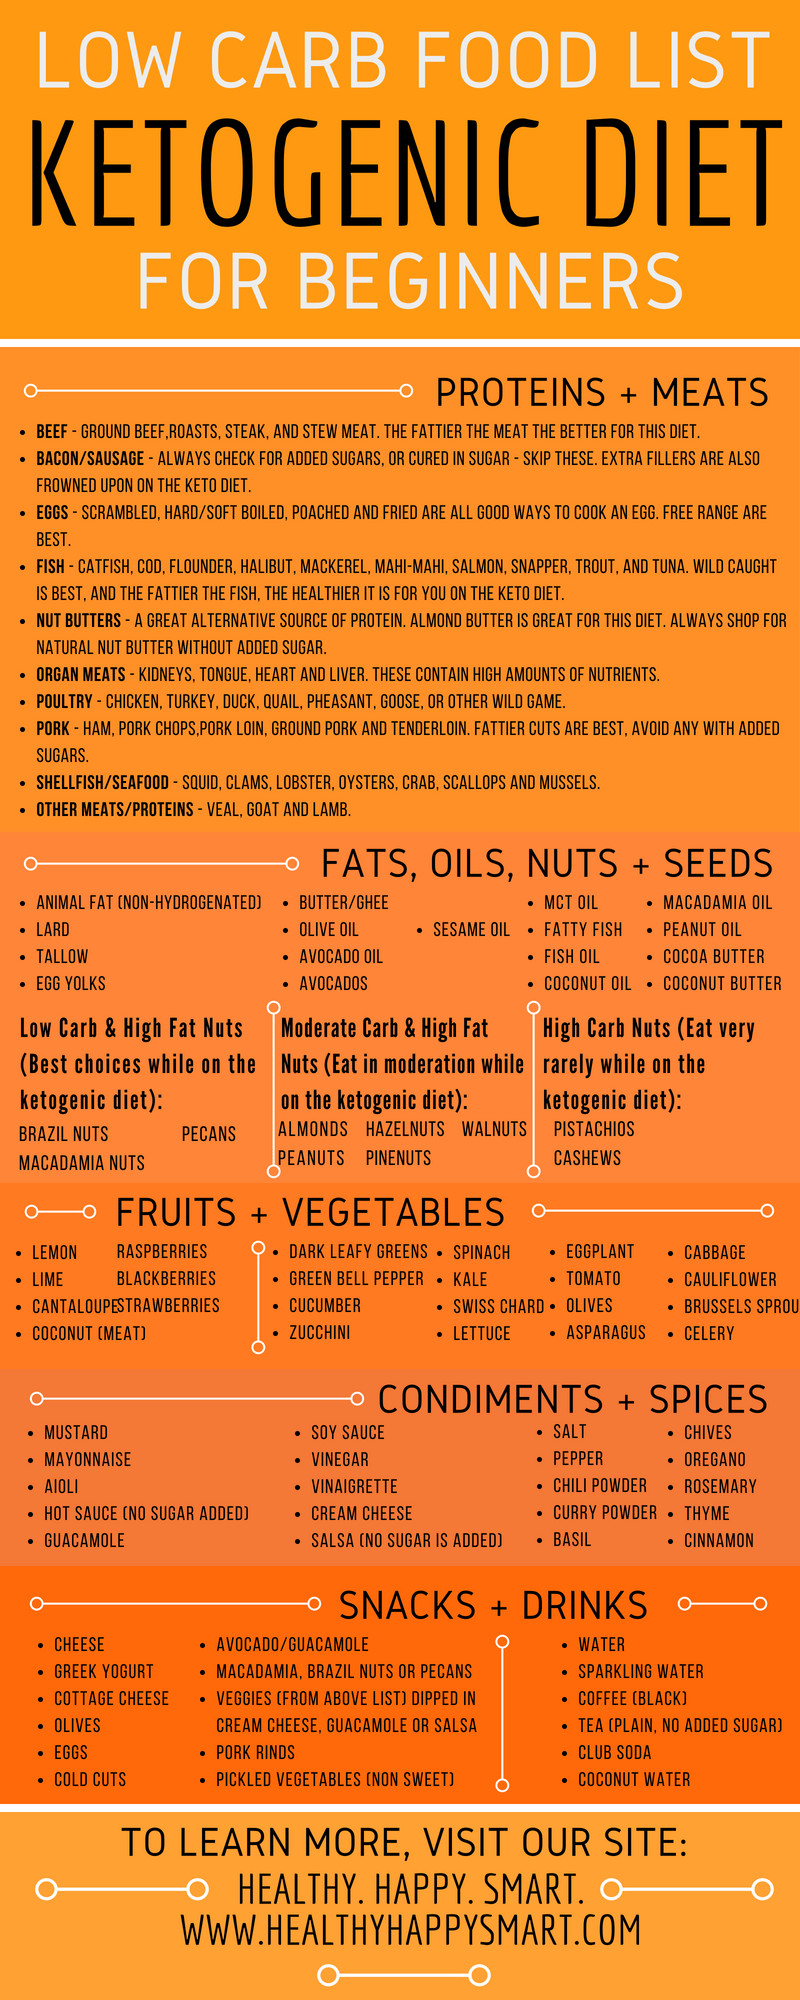 Keto Diet Foods
 Keto Diet Food List Guide What to Eat or Not Eat